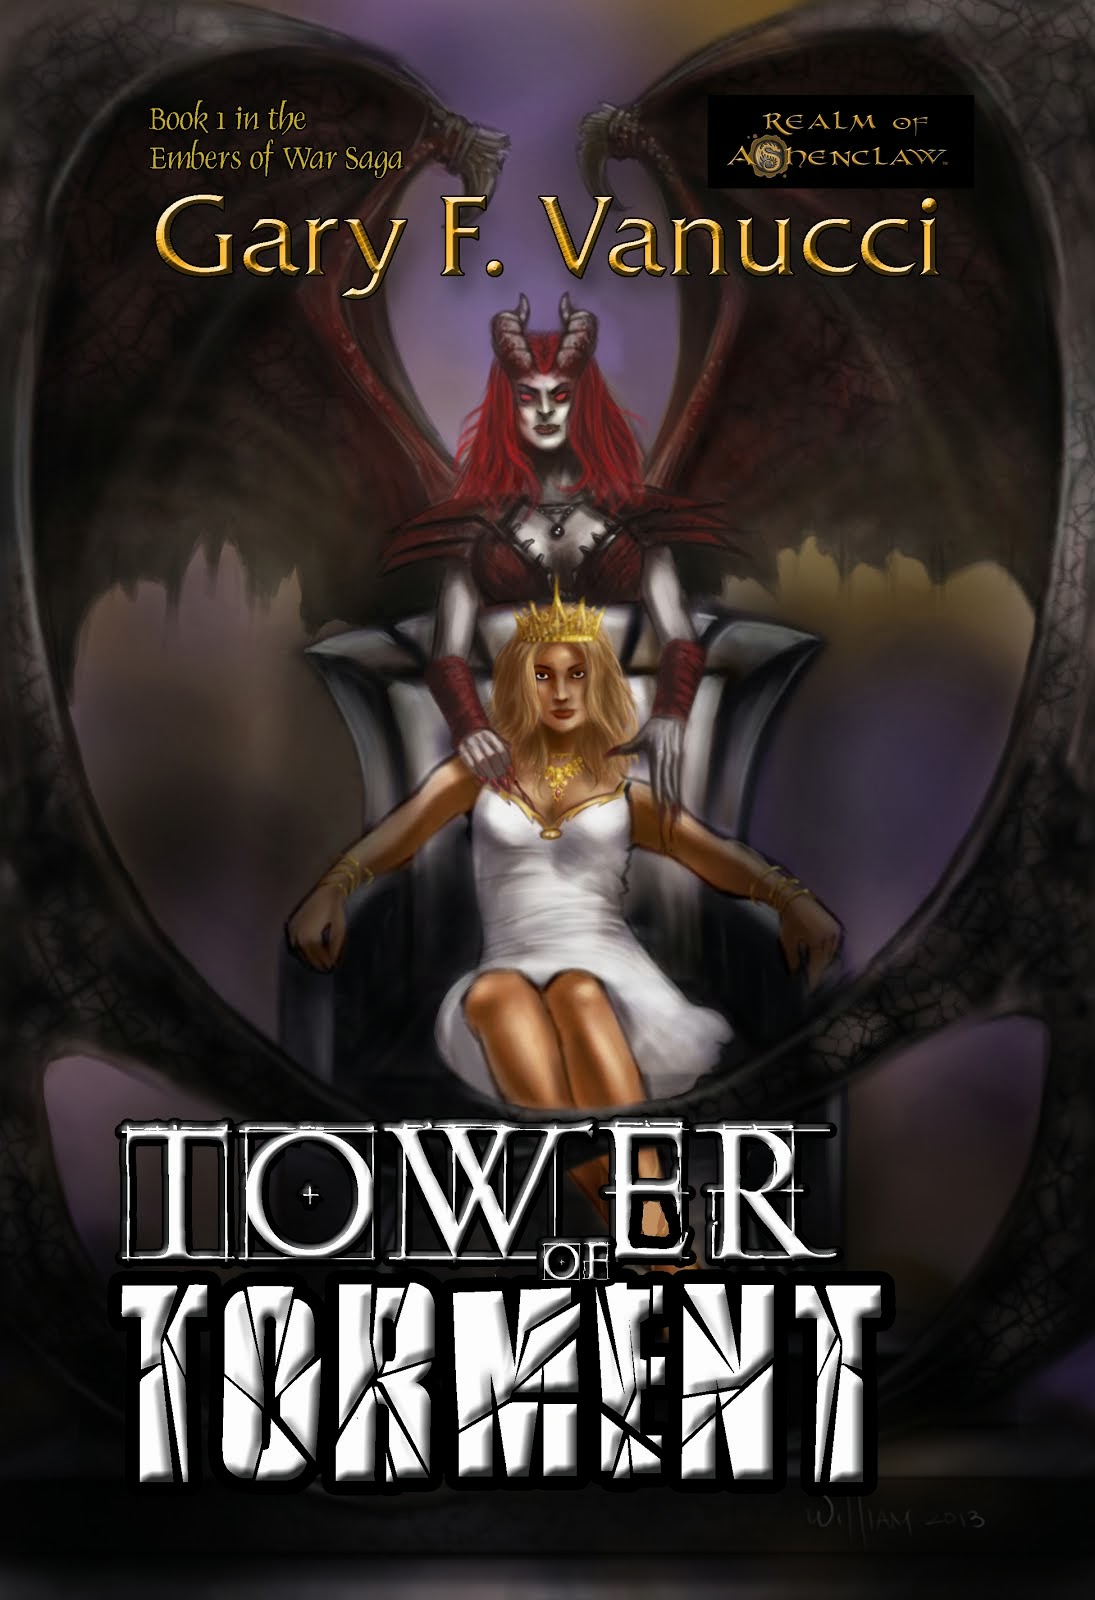 Tower of Torment